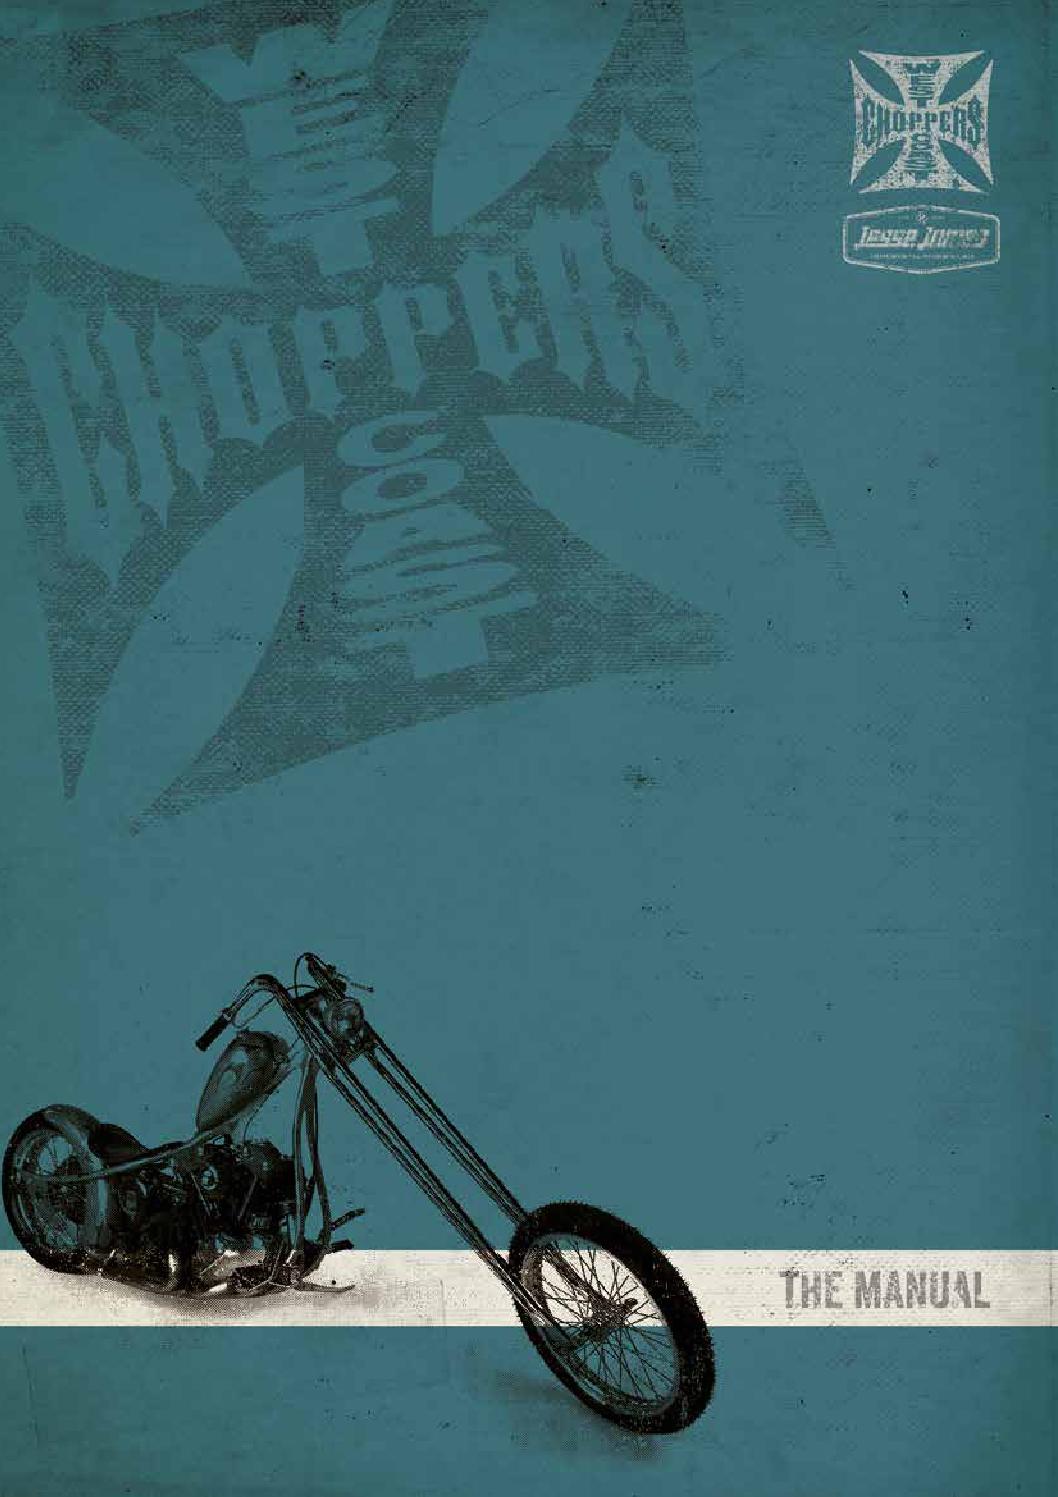 100+] West Coast Choppers Wallpapers